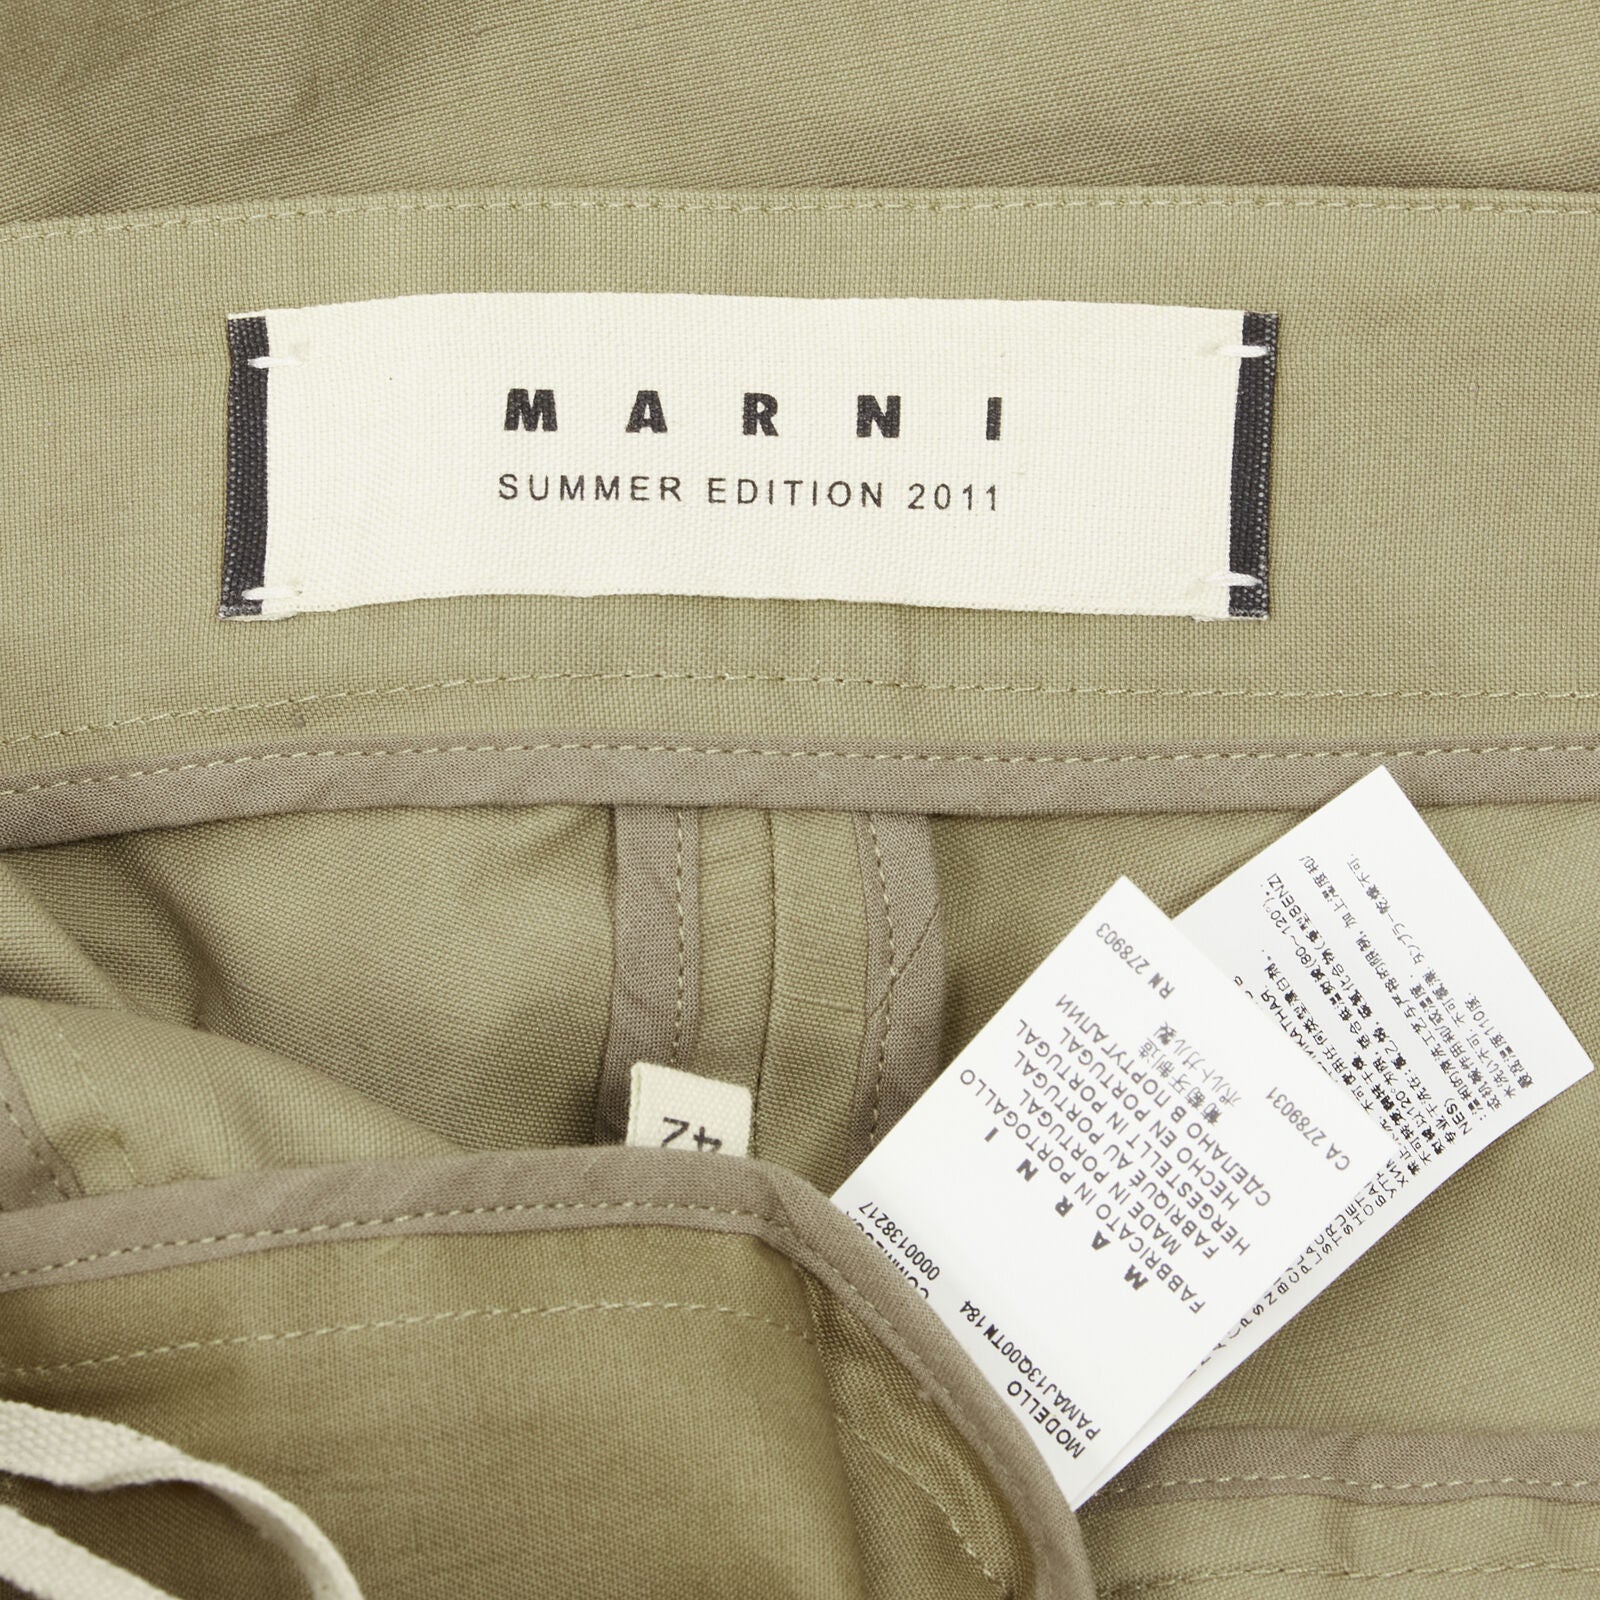 Authentic Marni 2011 Brown Solid Cotton Pants on sale at JHROP 